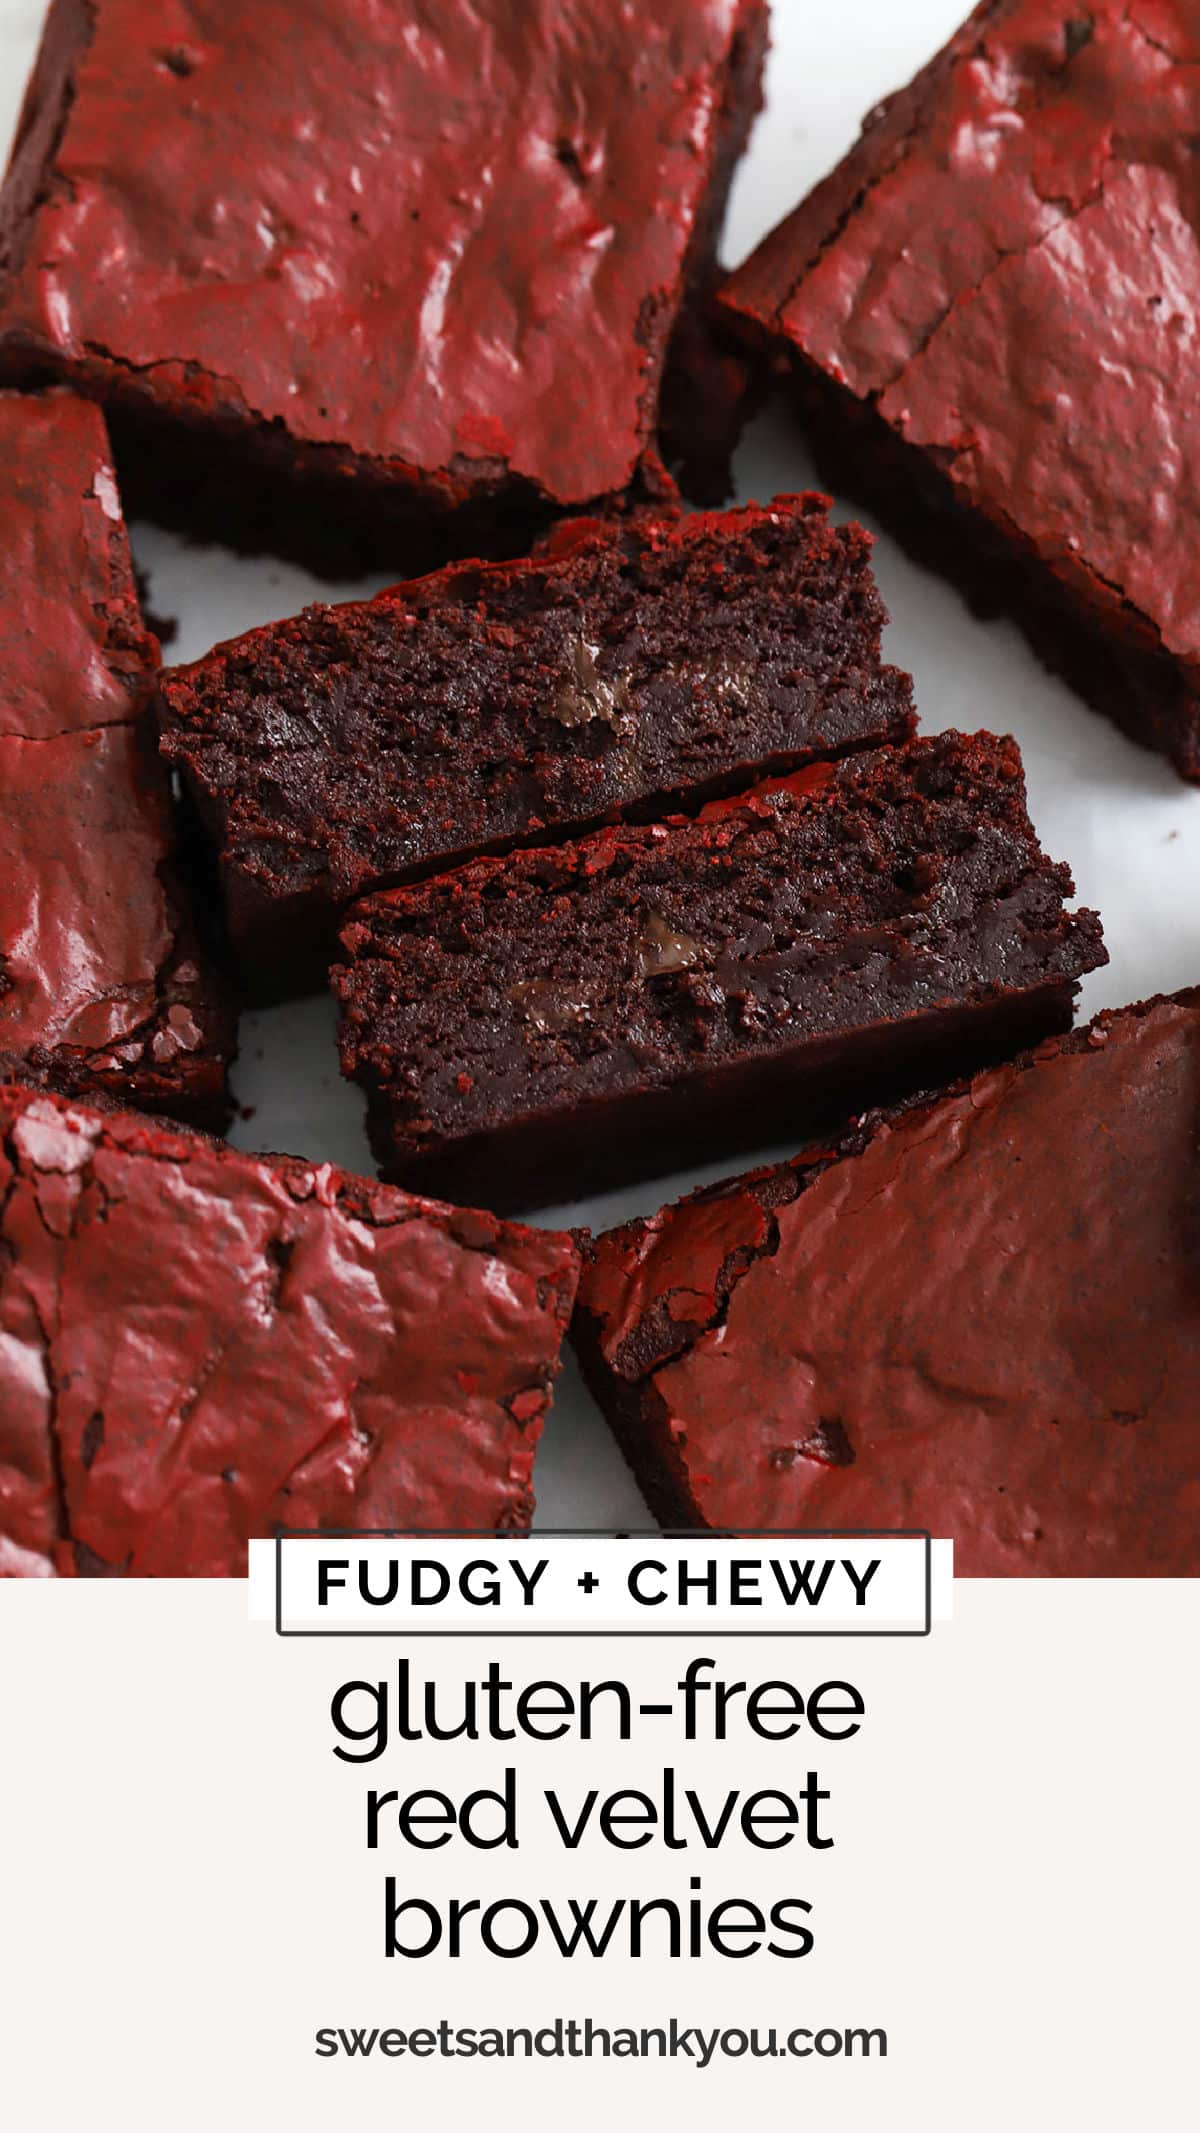 With their beautiful color and chocolate flavor, our Gluten-Free Red Velvet Brownies are a delightful twist on traditional brownies! This fudgy red velvet brownie recipe is perfect for Valentine's Day, Christmas, 4th of July, or birthdays. It's a delicious gluten-free brownies recipe you'll LOVE!